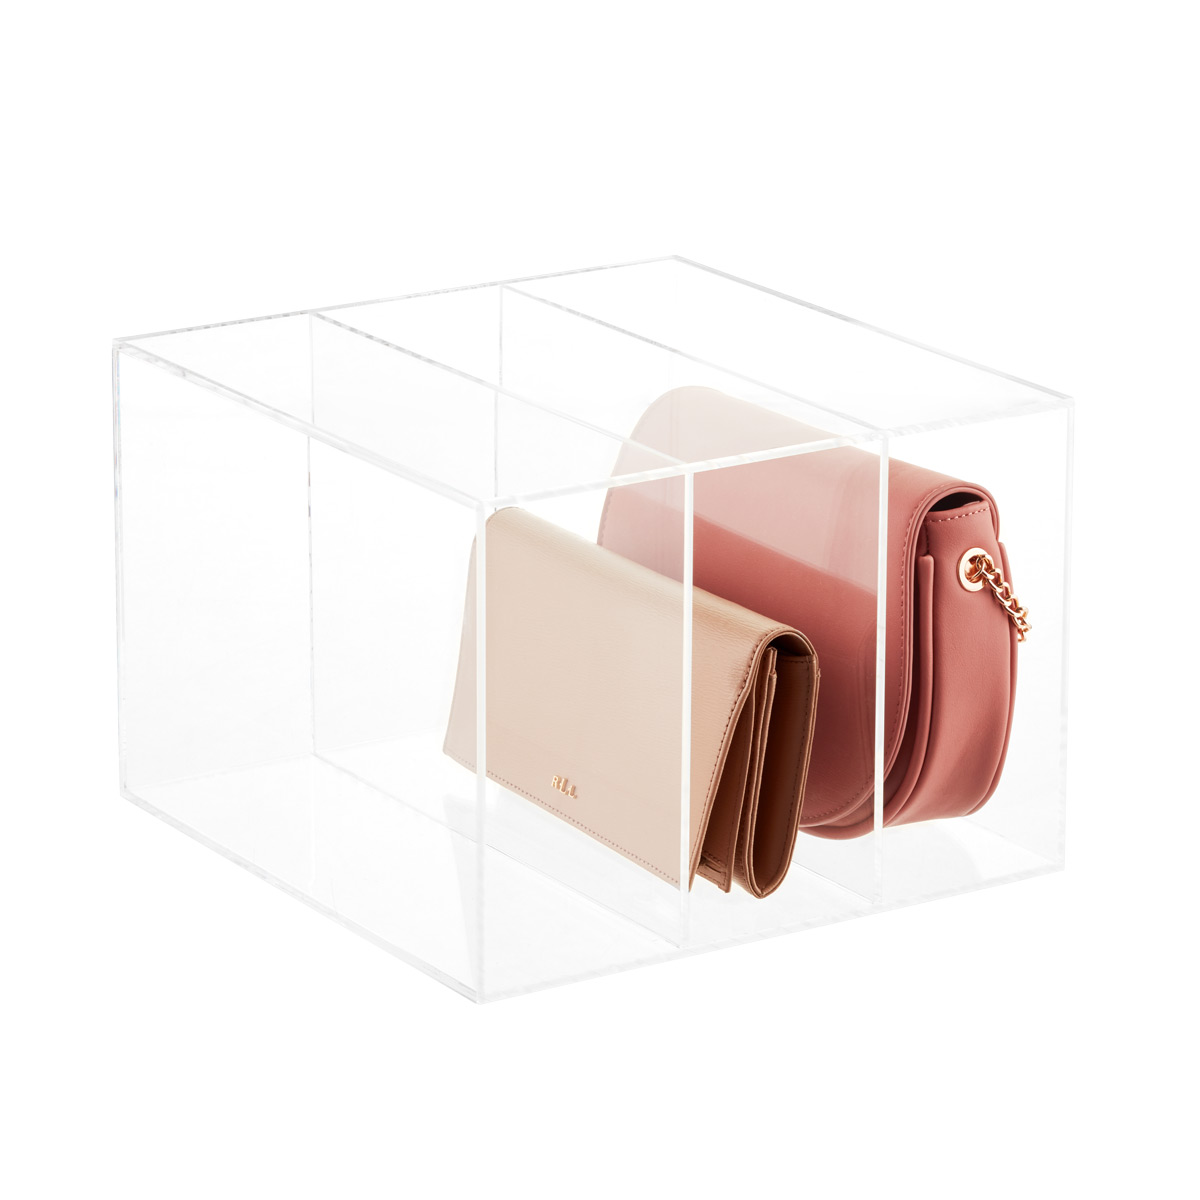 The Container Store Luxe Acrylic Container | The Container Store